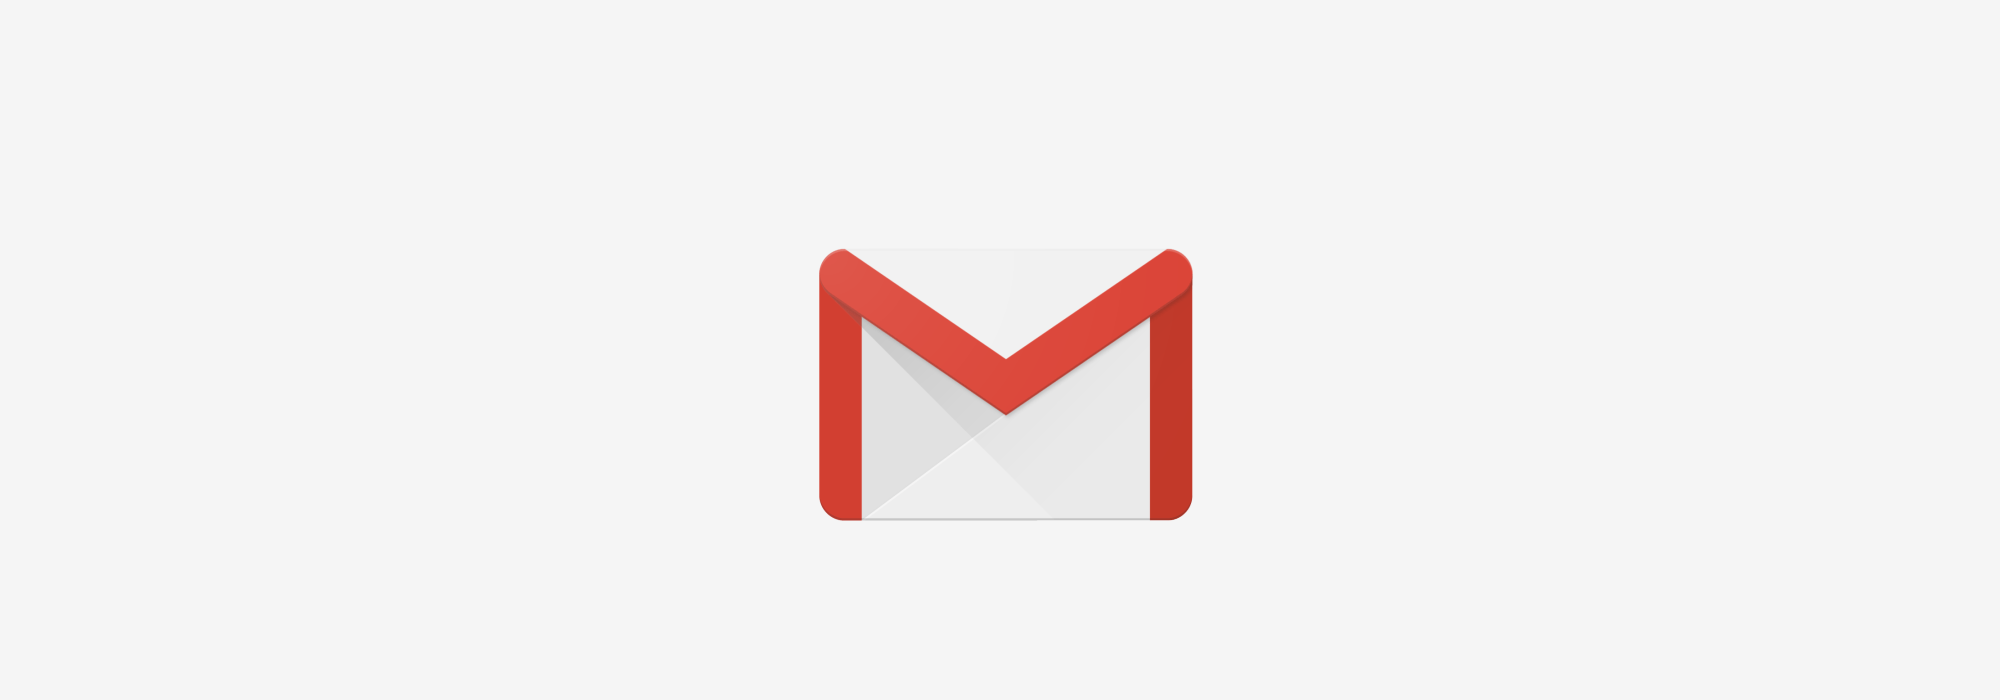 Google Sign Logo - Inbox by Gmail